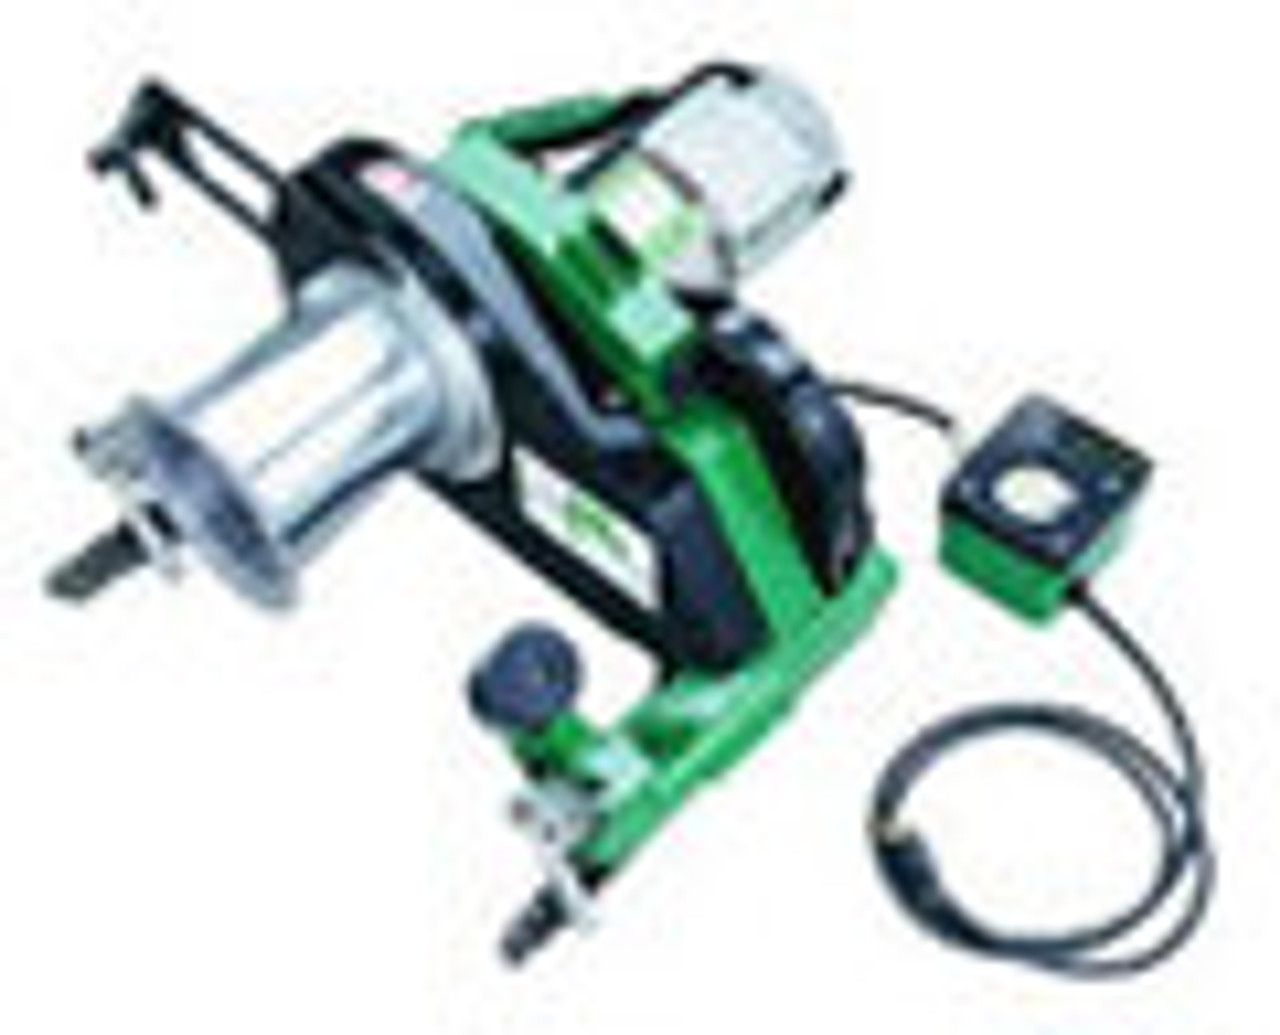 Cable Pullers - Finest Equipment From Greenlee and Garden Bender!